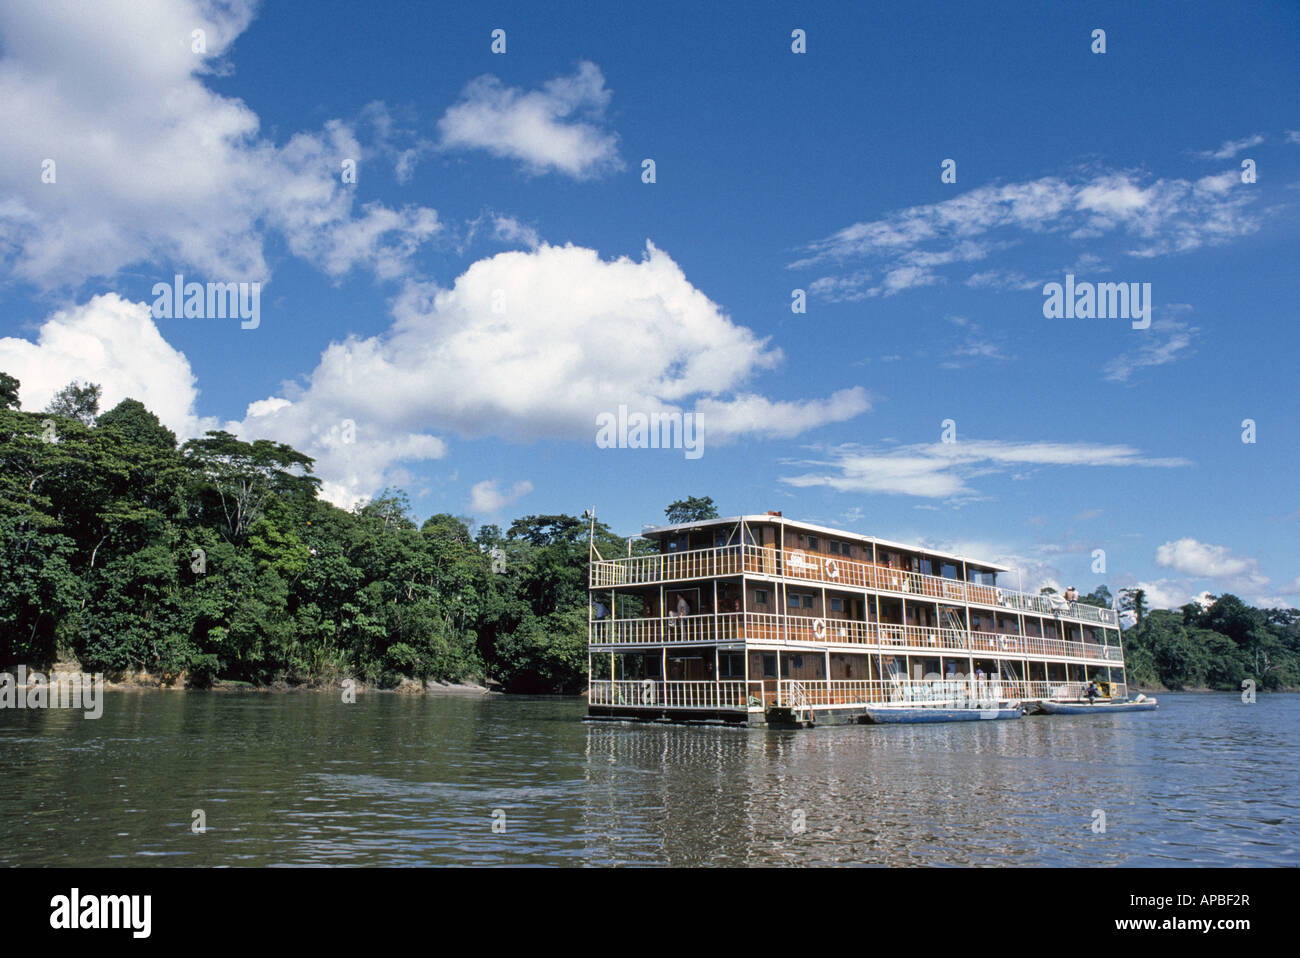 The Flotel Orellana a floating hotel on the Rio Napo River a tributary of the Amazon in the rain forest of Ecuador in the Amazon Stock Photo